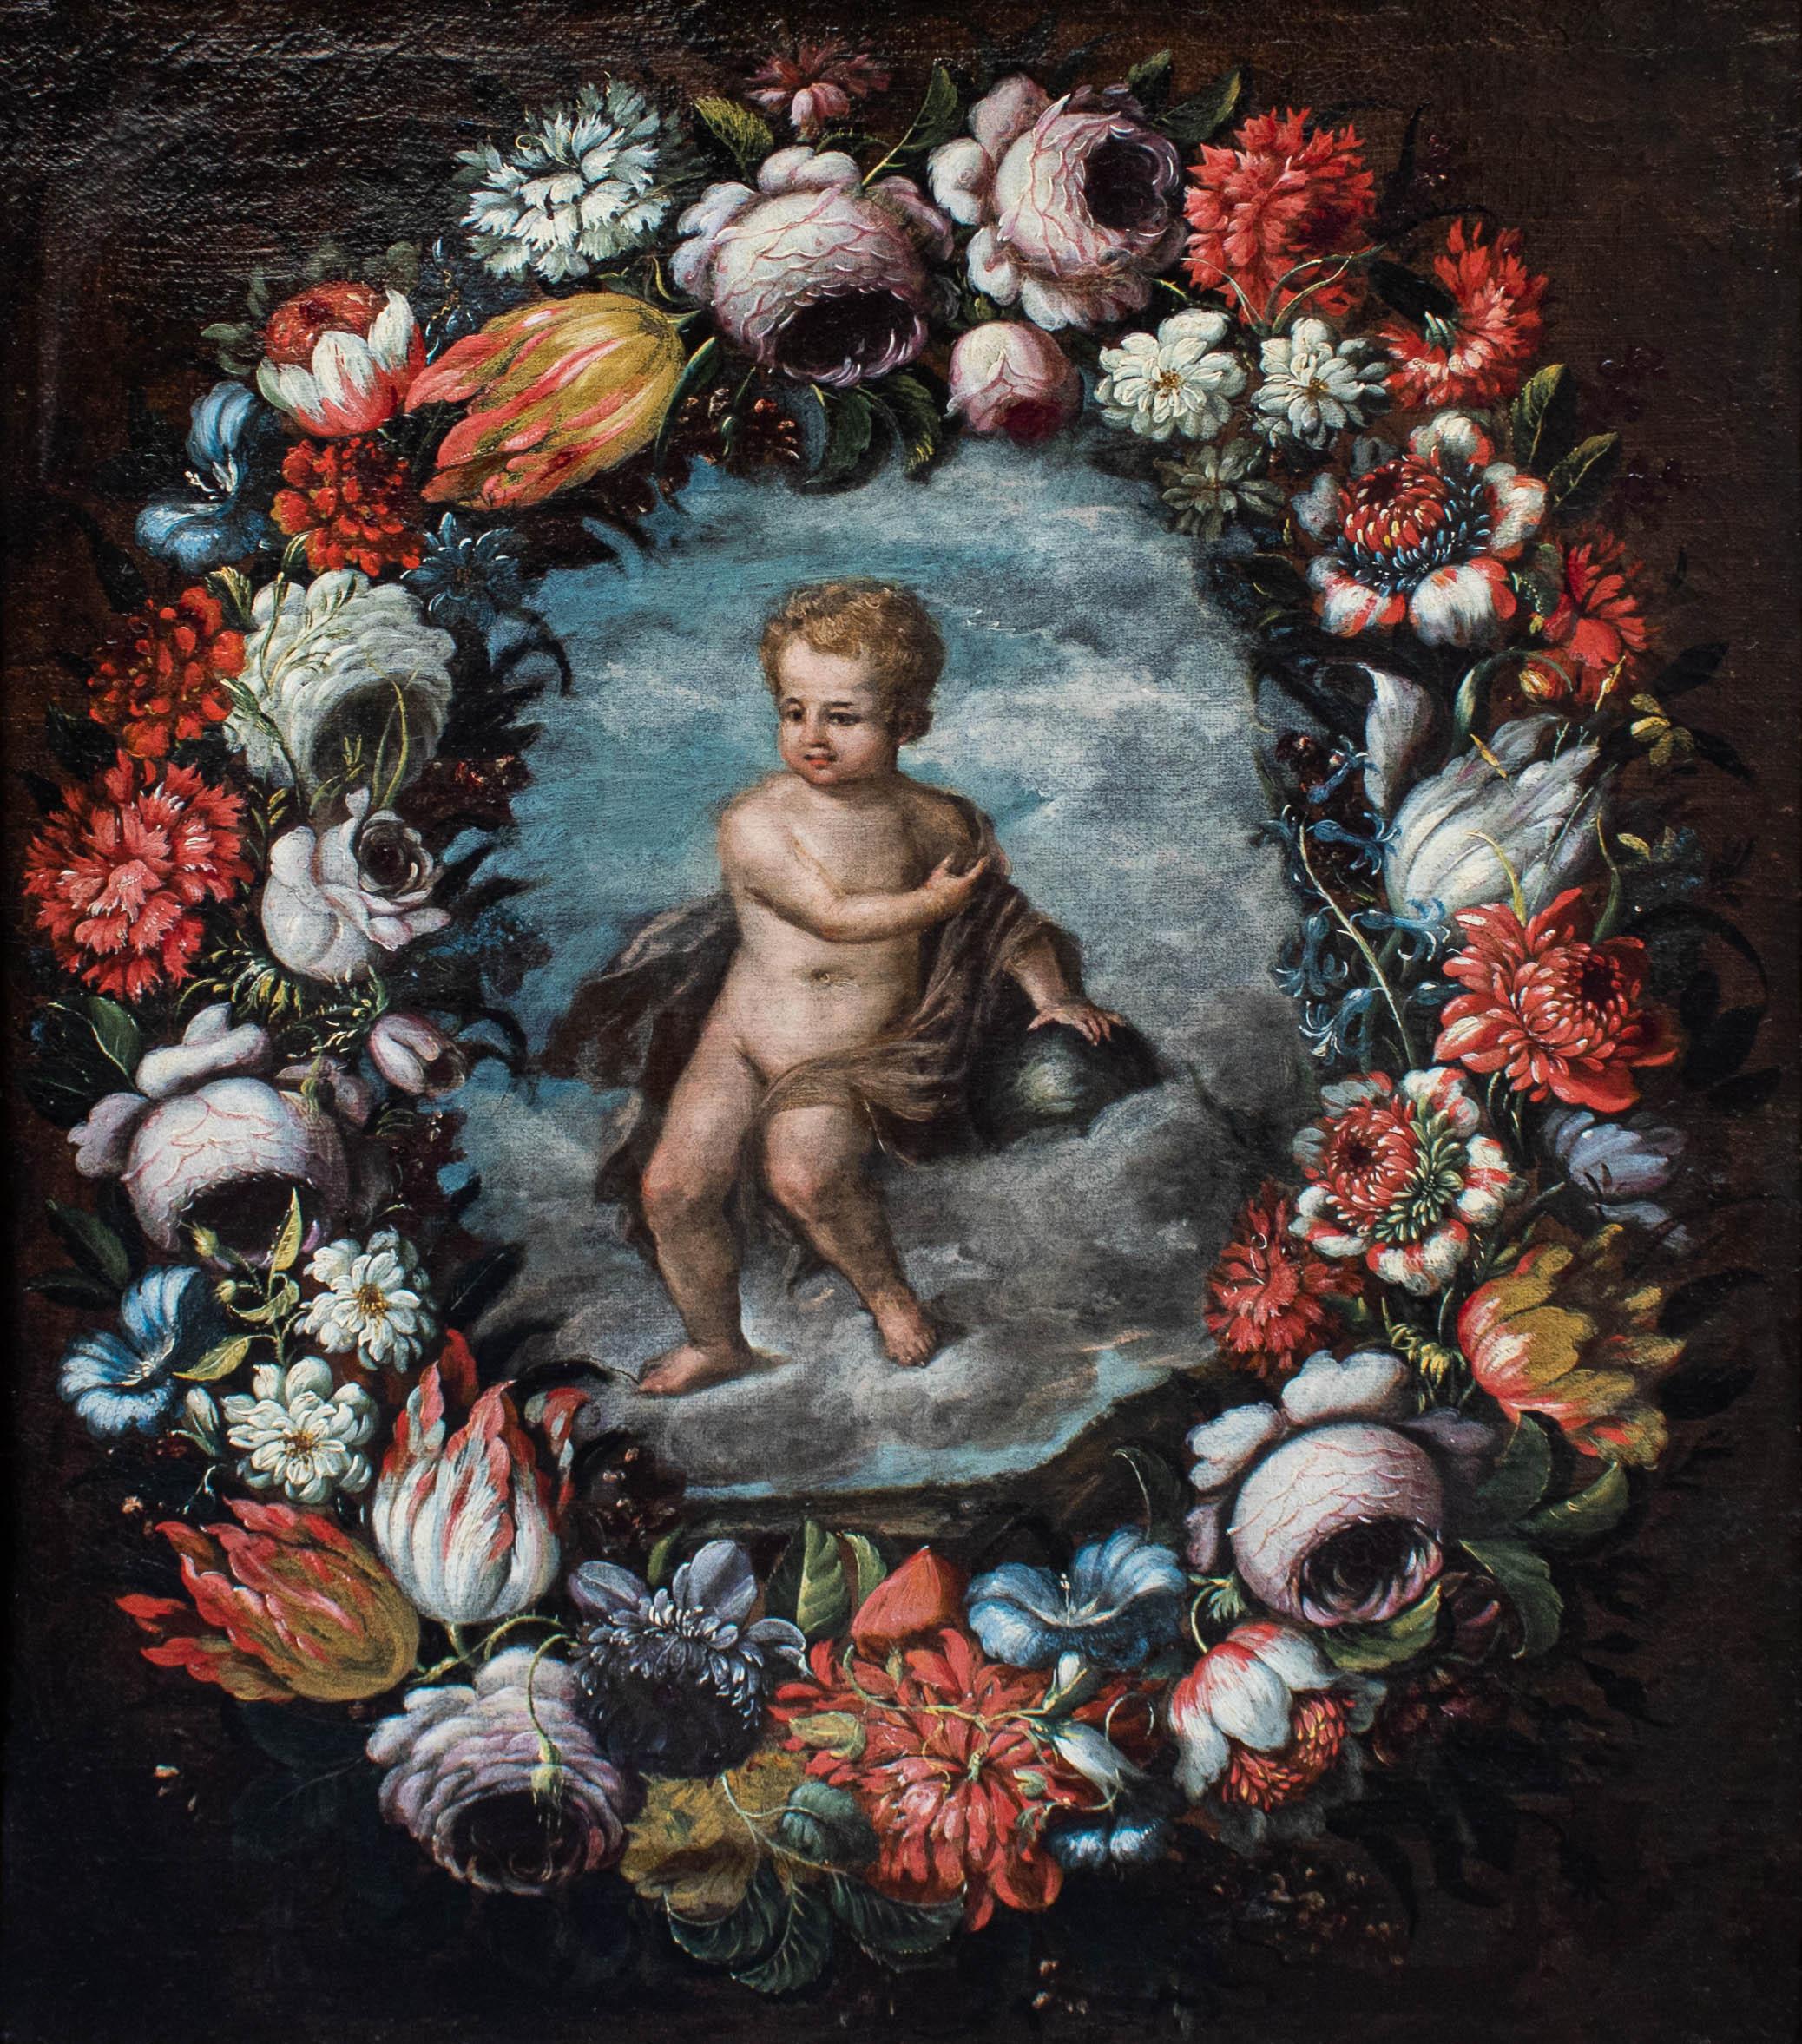 Lombard School, 17th century

Christ child with globe within garland of flowers

Oil on canvas, 72 x 61 cm 

Framed 90, 5 x 80

The present painting, framed by a sumptuous antique frame, depicts the figure of the Christ Child with the globe within a